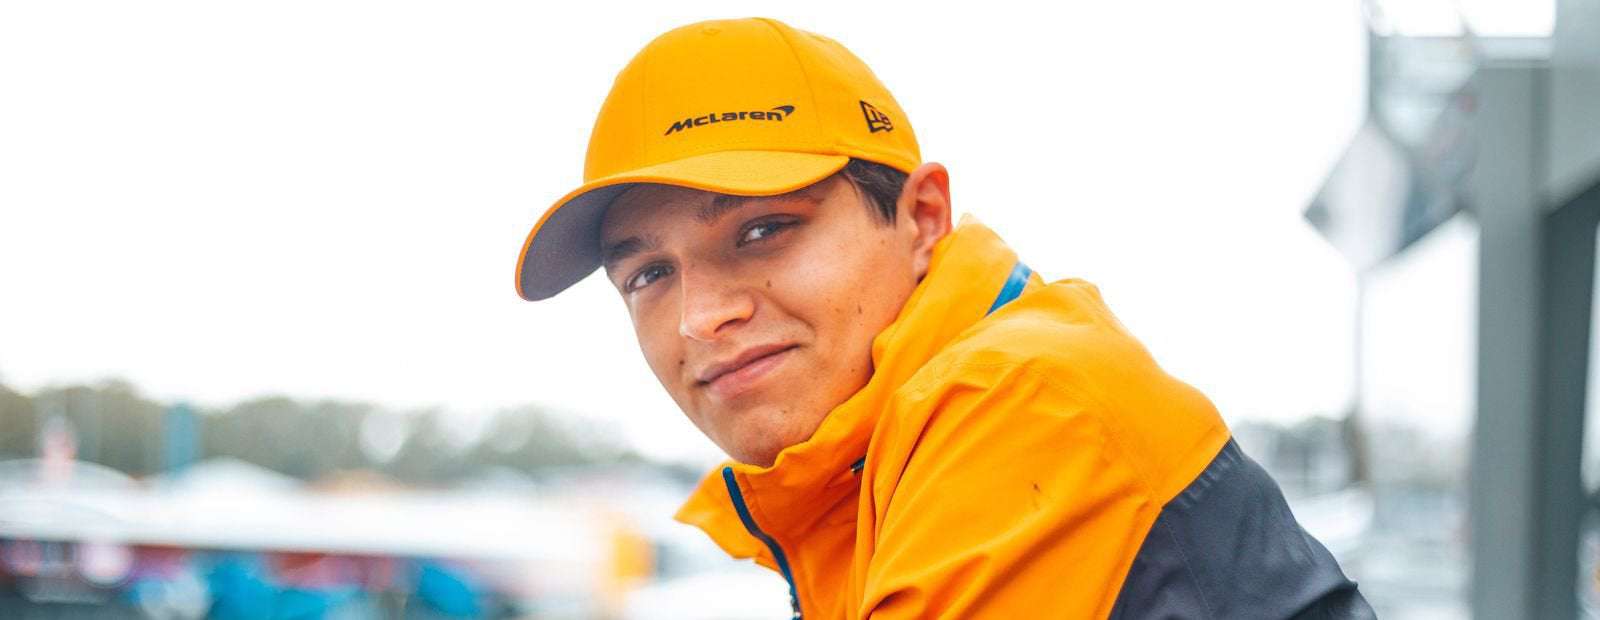 image for McLaren Racing announces multi-year extension with Lando Norris